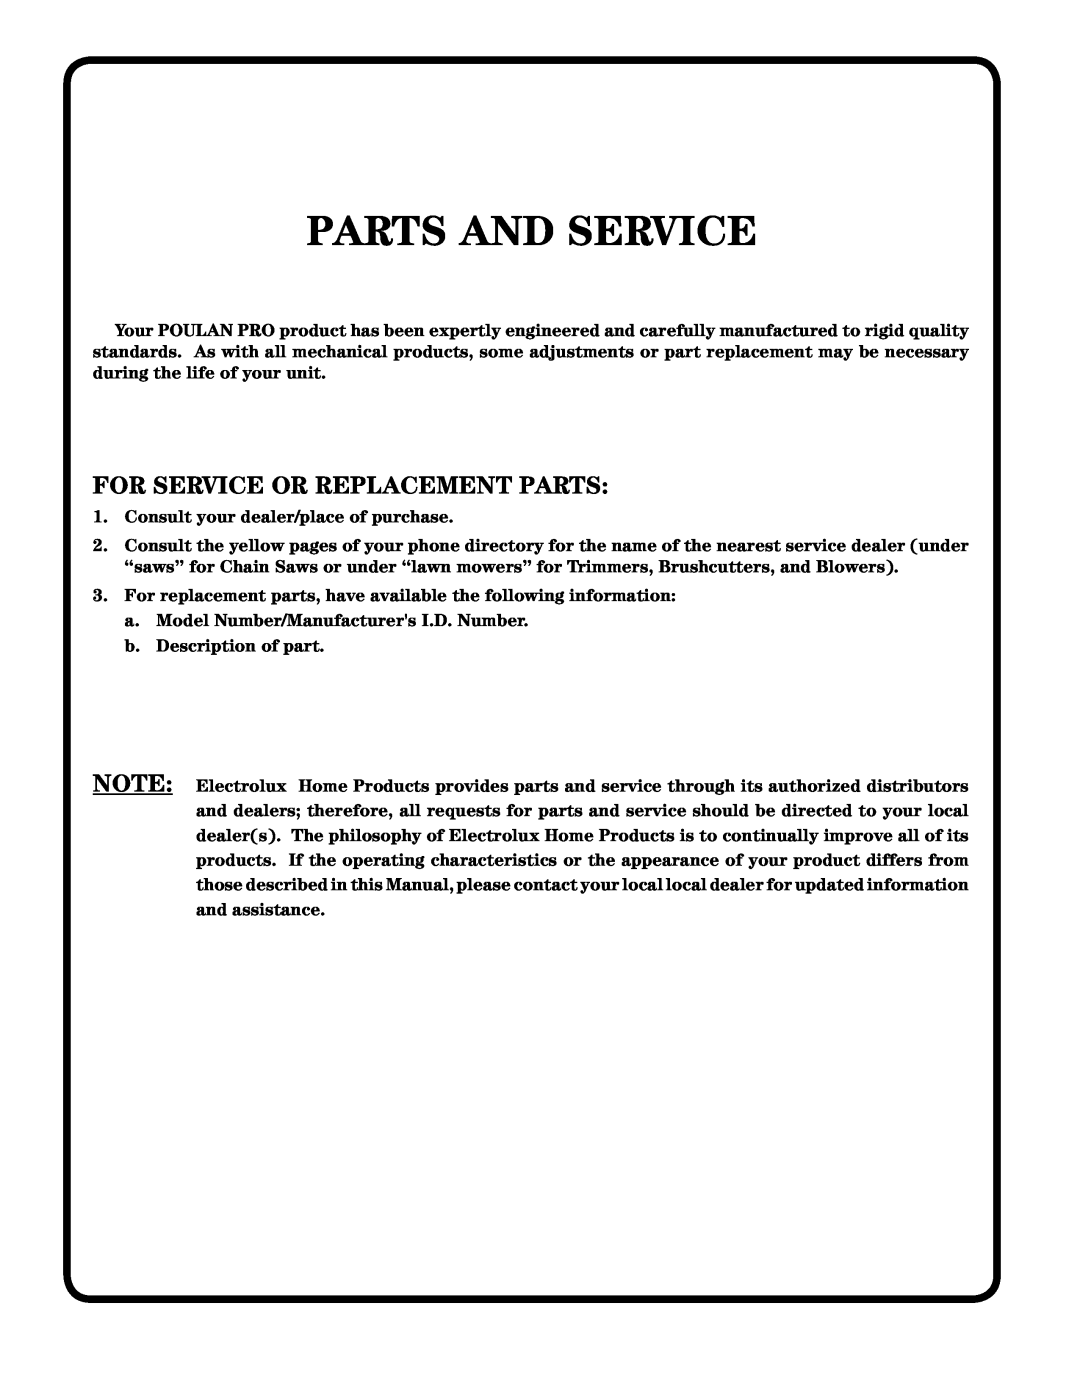 Poulan 187009 owner manual Parts And Service, For Service Or Replacement Parts 